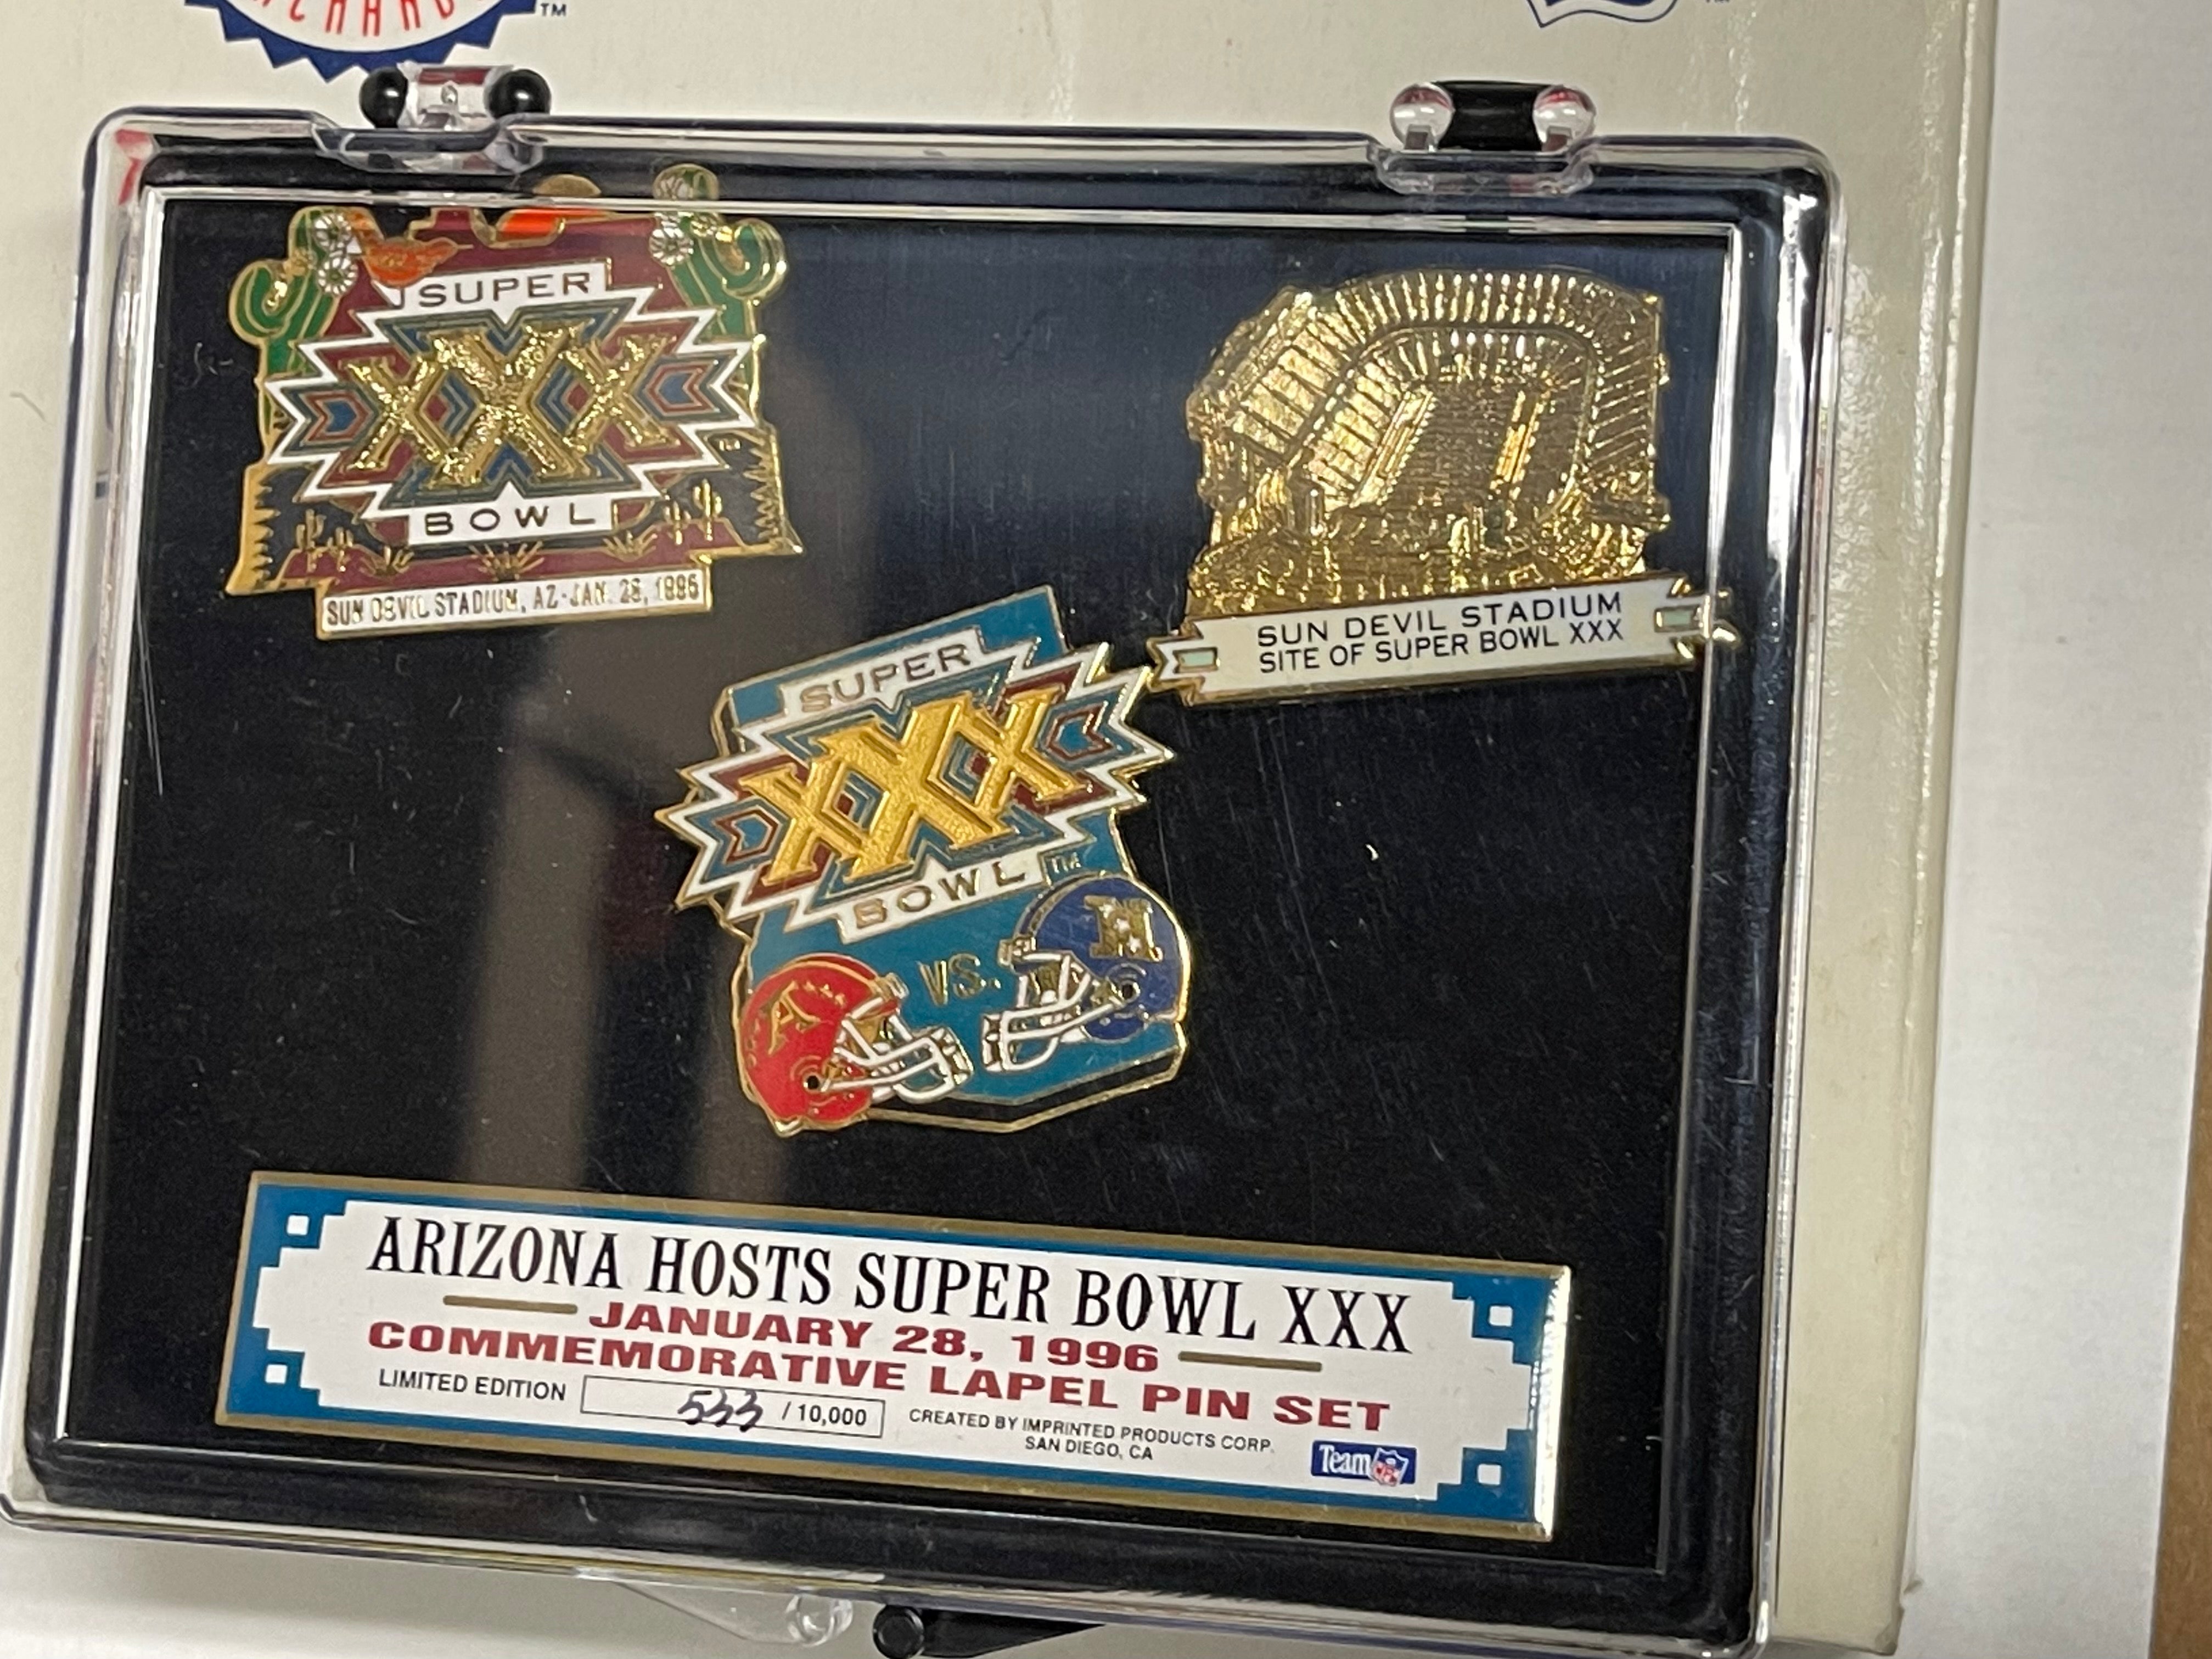 Super Bowl football game numbered limited issue pin set 1996